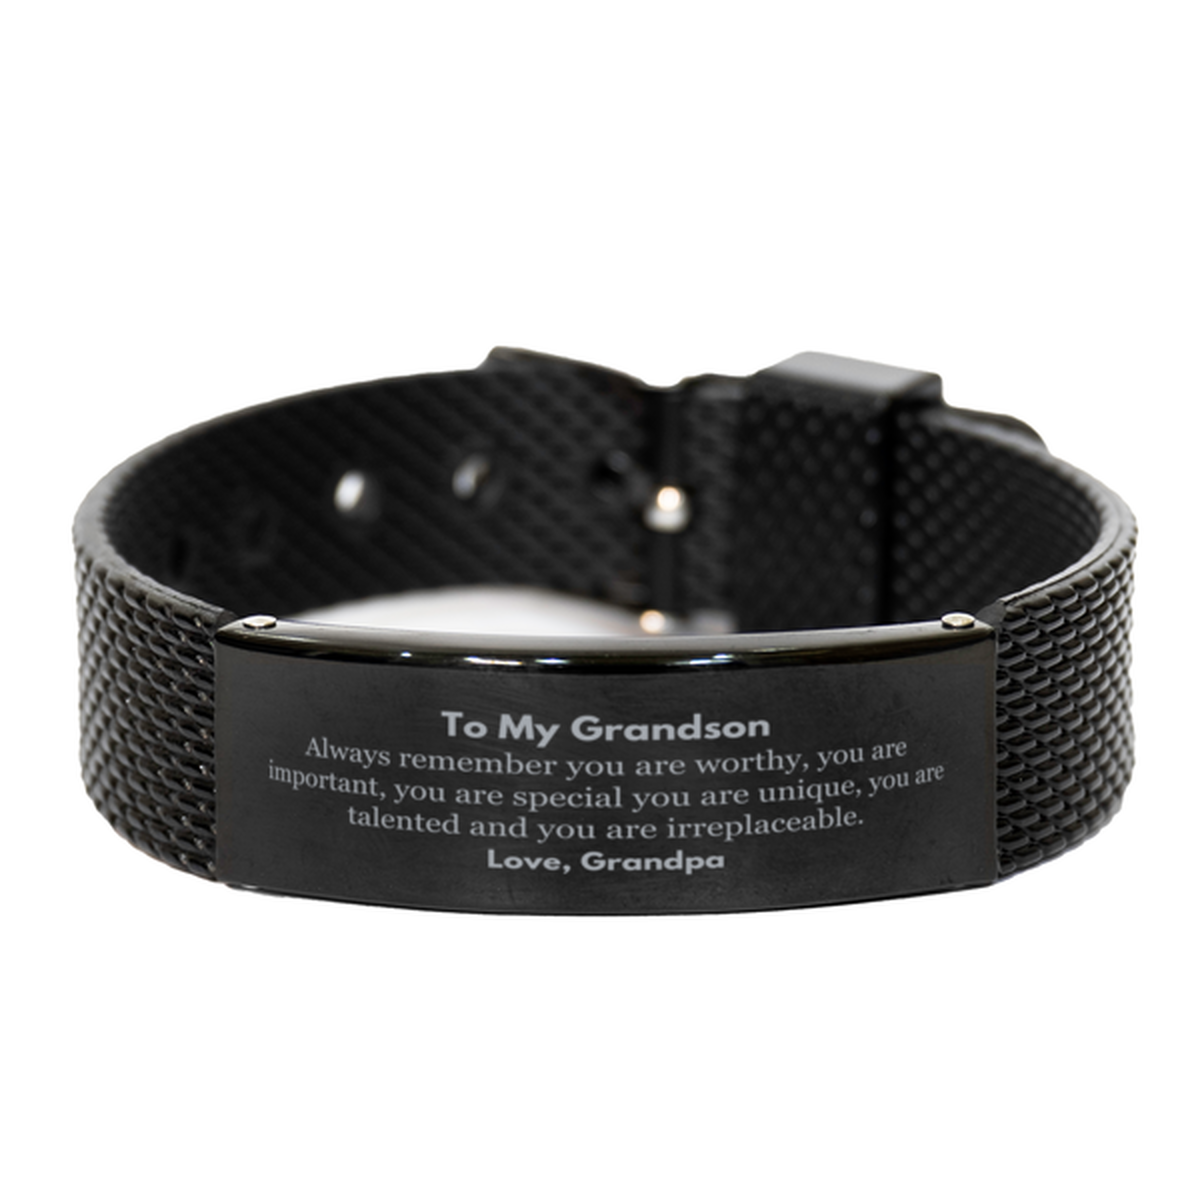 Grandson Birthday Gifts from Grandpa, Inspirational Black Shark Mesh Bracelet for Grandson Christmas Graduation Gifts for Grandson Always remember you are worthy, you are important. Love, Grandpa